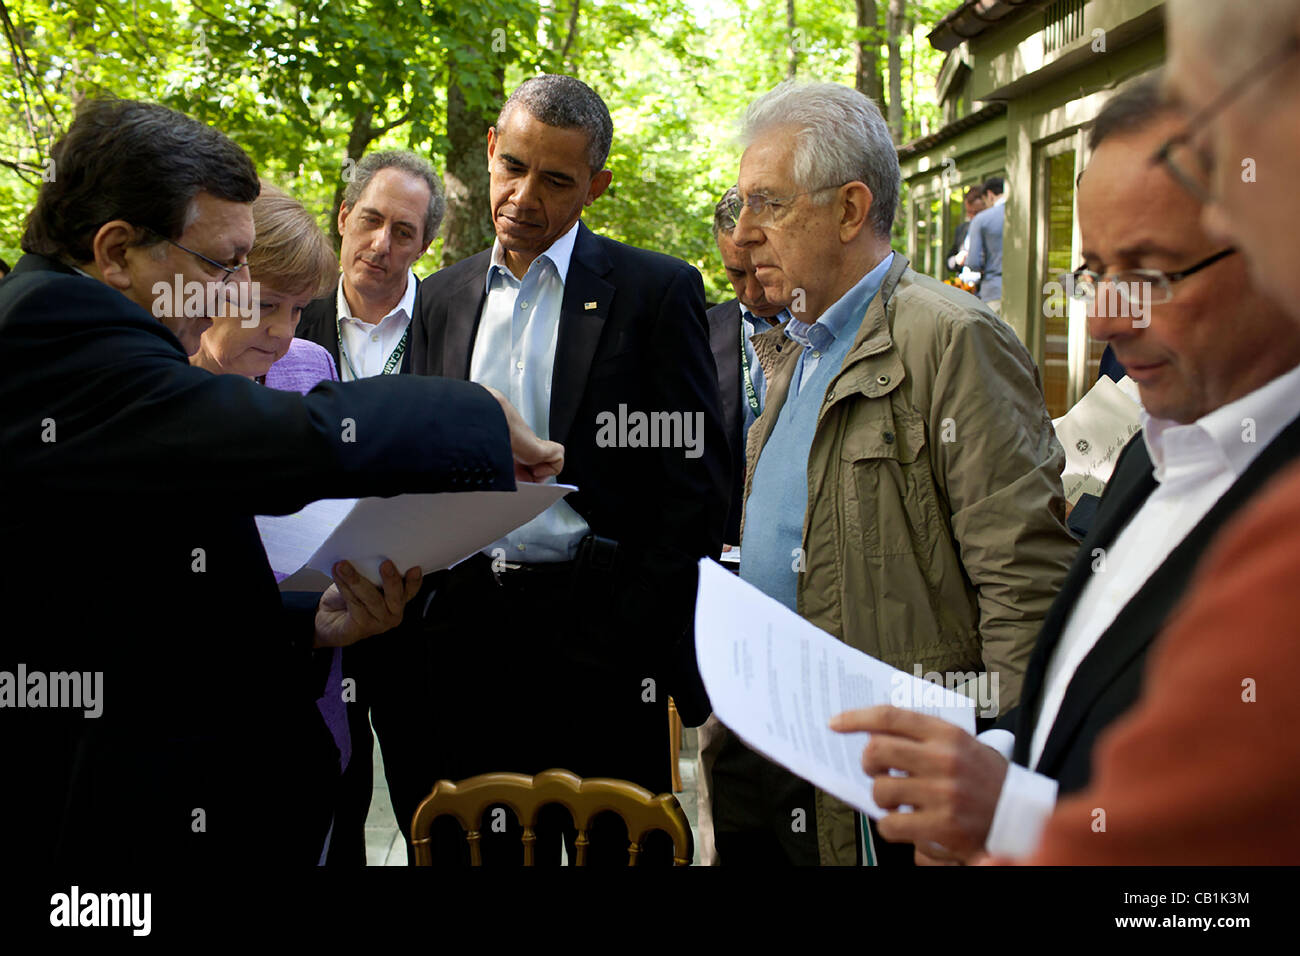 US President Barack Obama talks with José Manuel Barroso, President of the European Commission, Chancellor Angela Merkel of Germany, Prime Minister Mario Monti of Italy, President François Hollande of France, and Herman Van Rompuy, President of the European Council, on the Laurel Cabin patio before Stock Photo